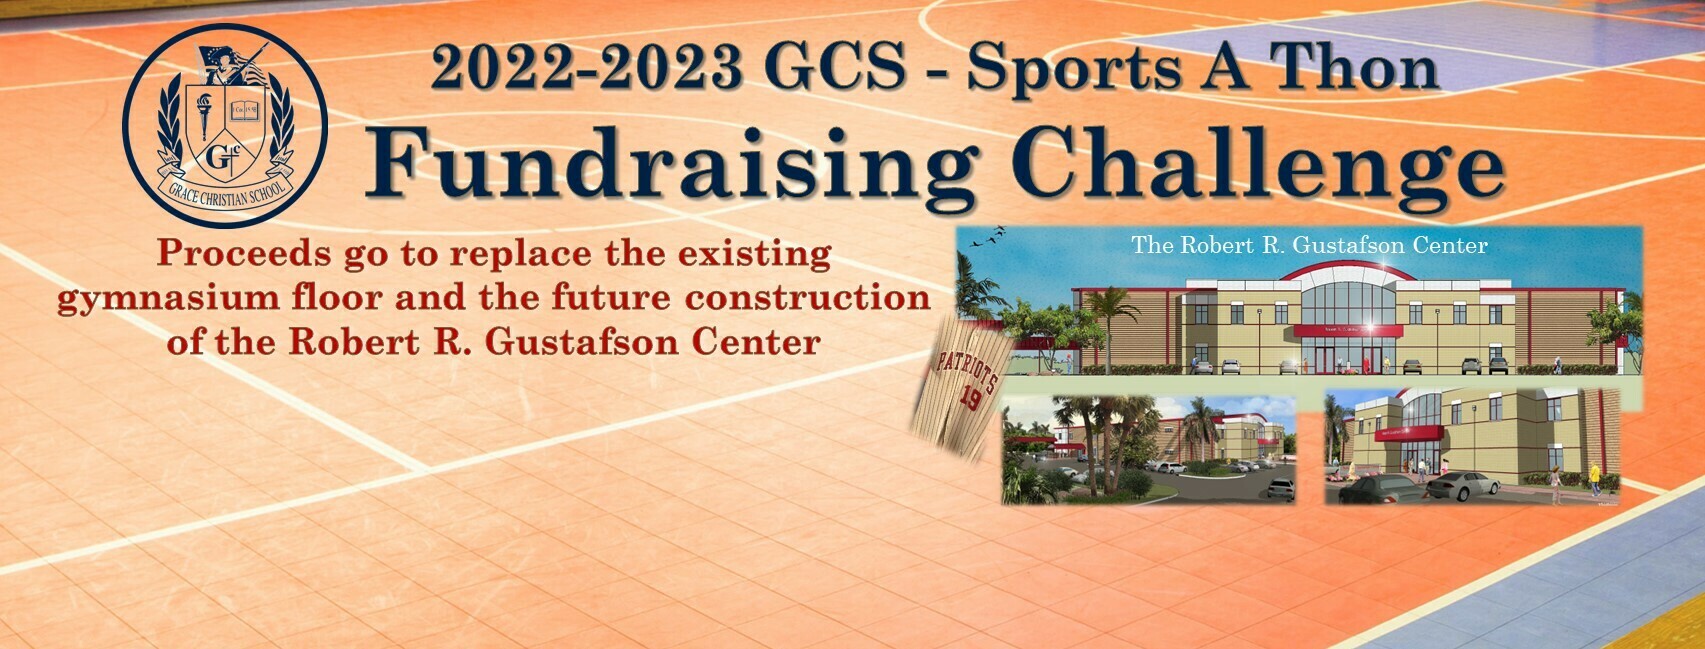 GCS 2022-2023 Sports A Thon Fundraising Challenge